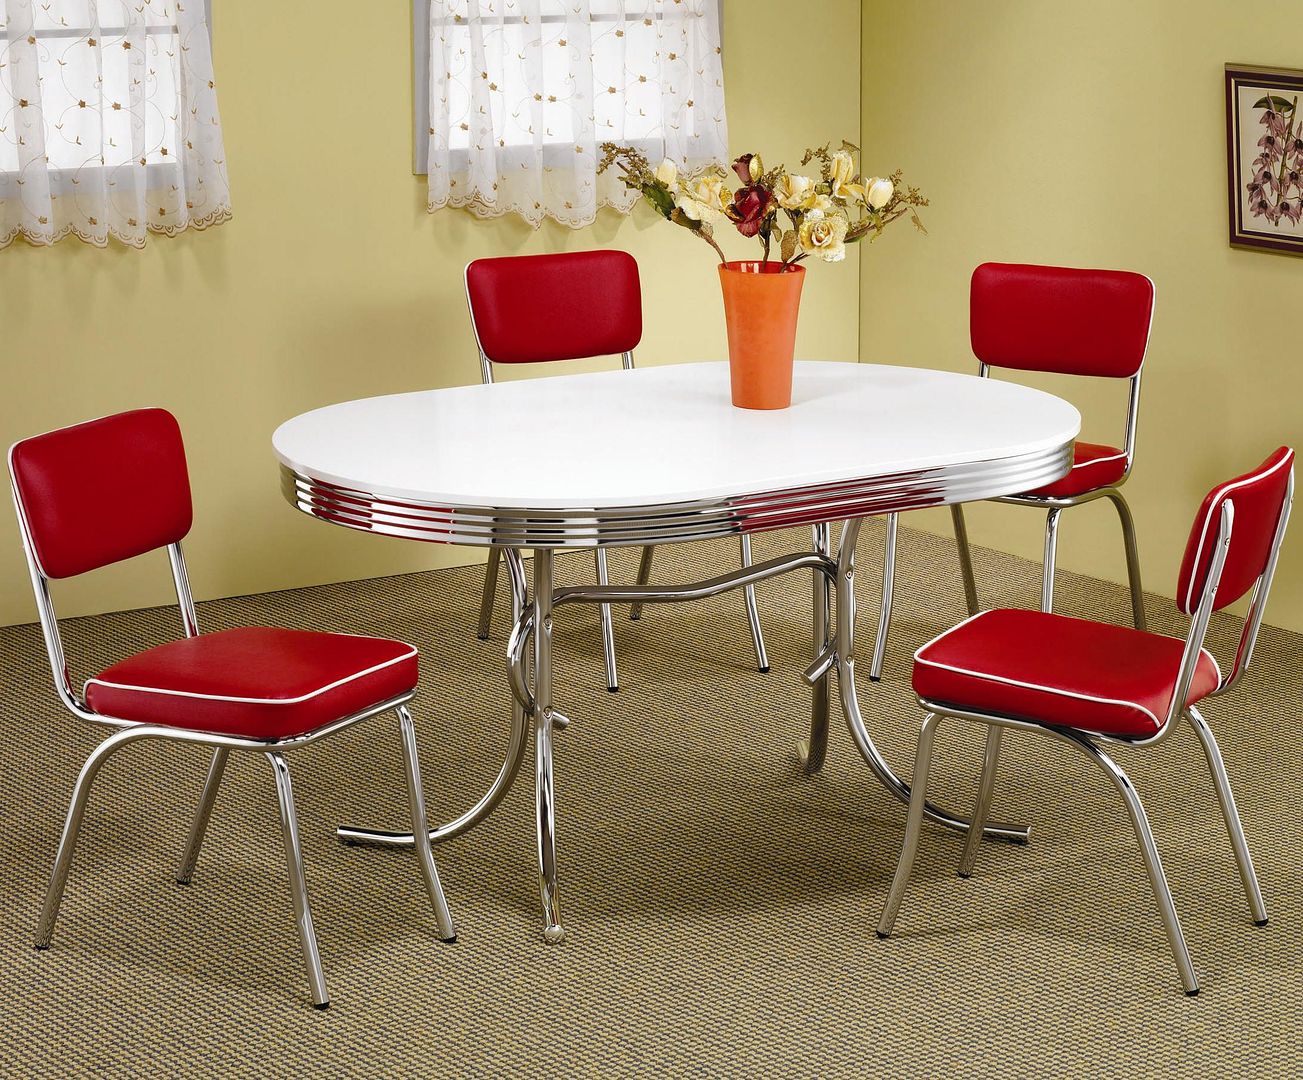 Retro 1950s Oval Dining Table And Red Chair 5 Piece Set By Coaster